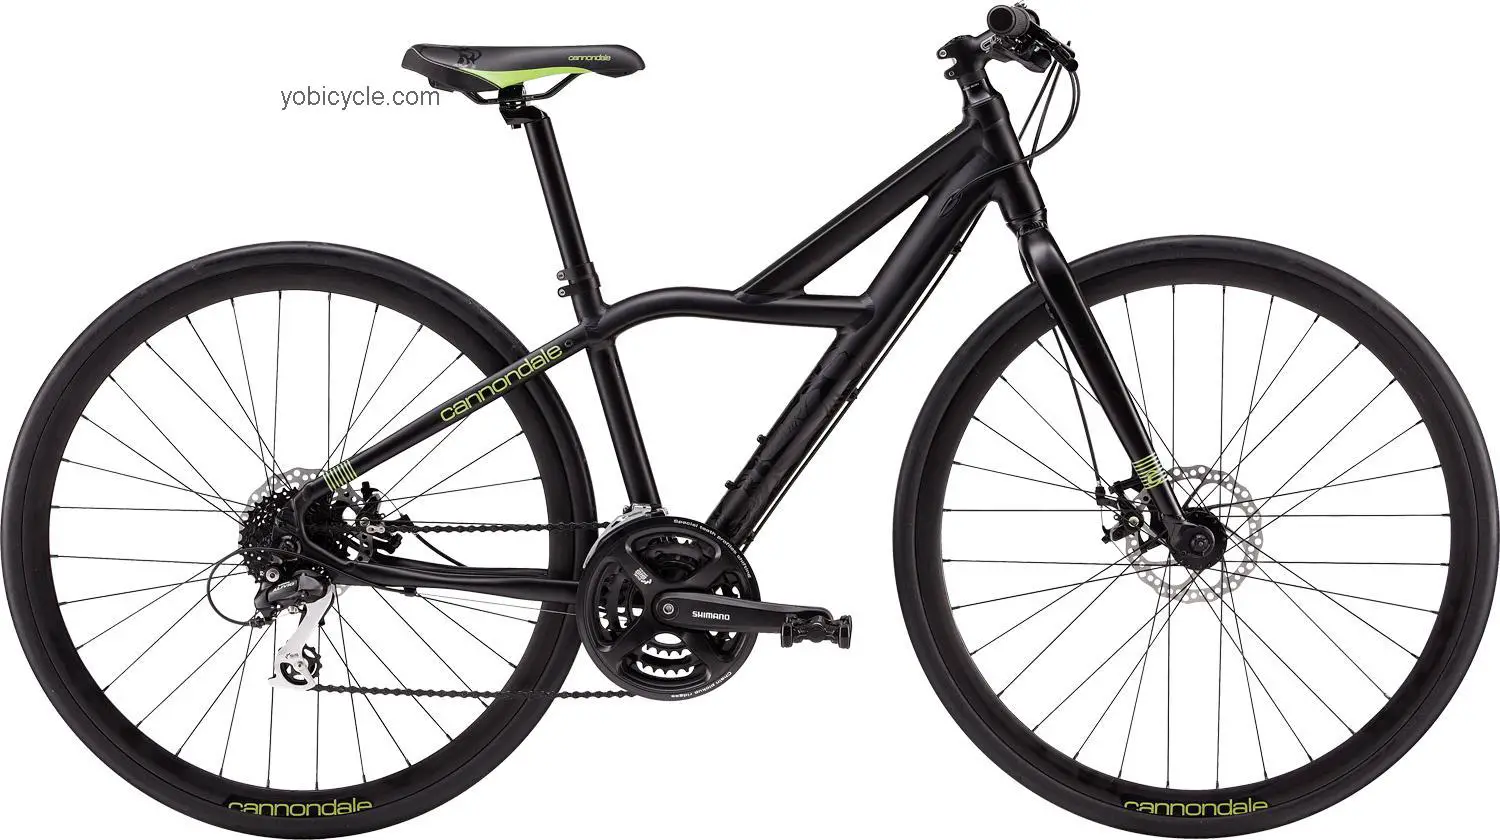 Cannondale Badgirl 3 2013 comparison online with competitors